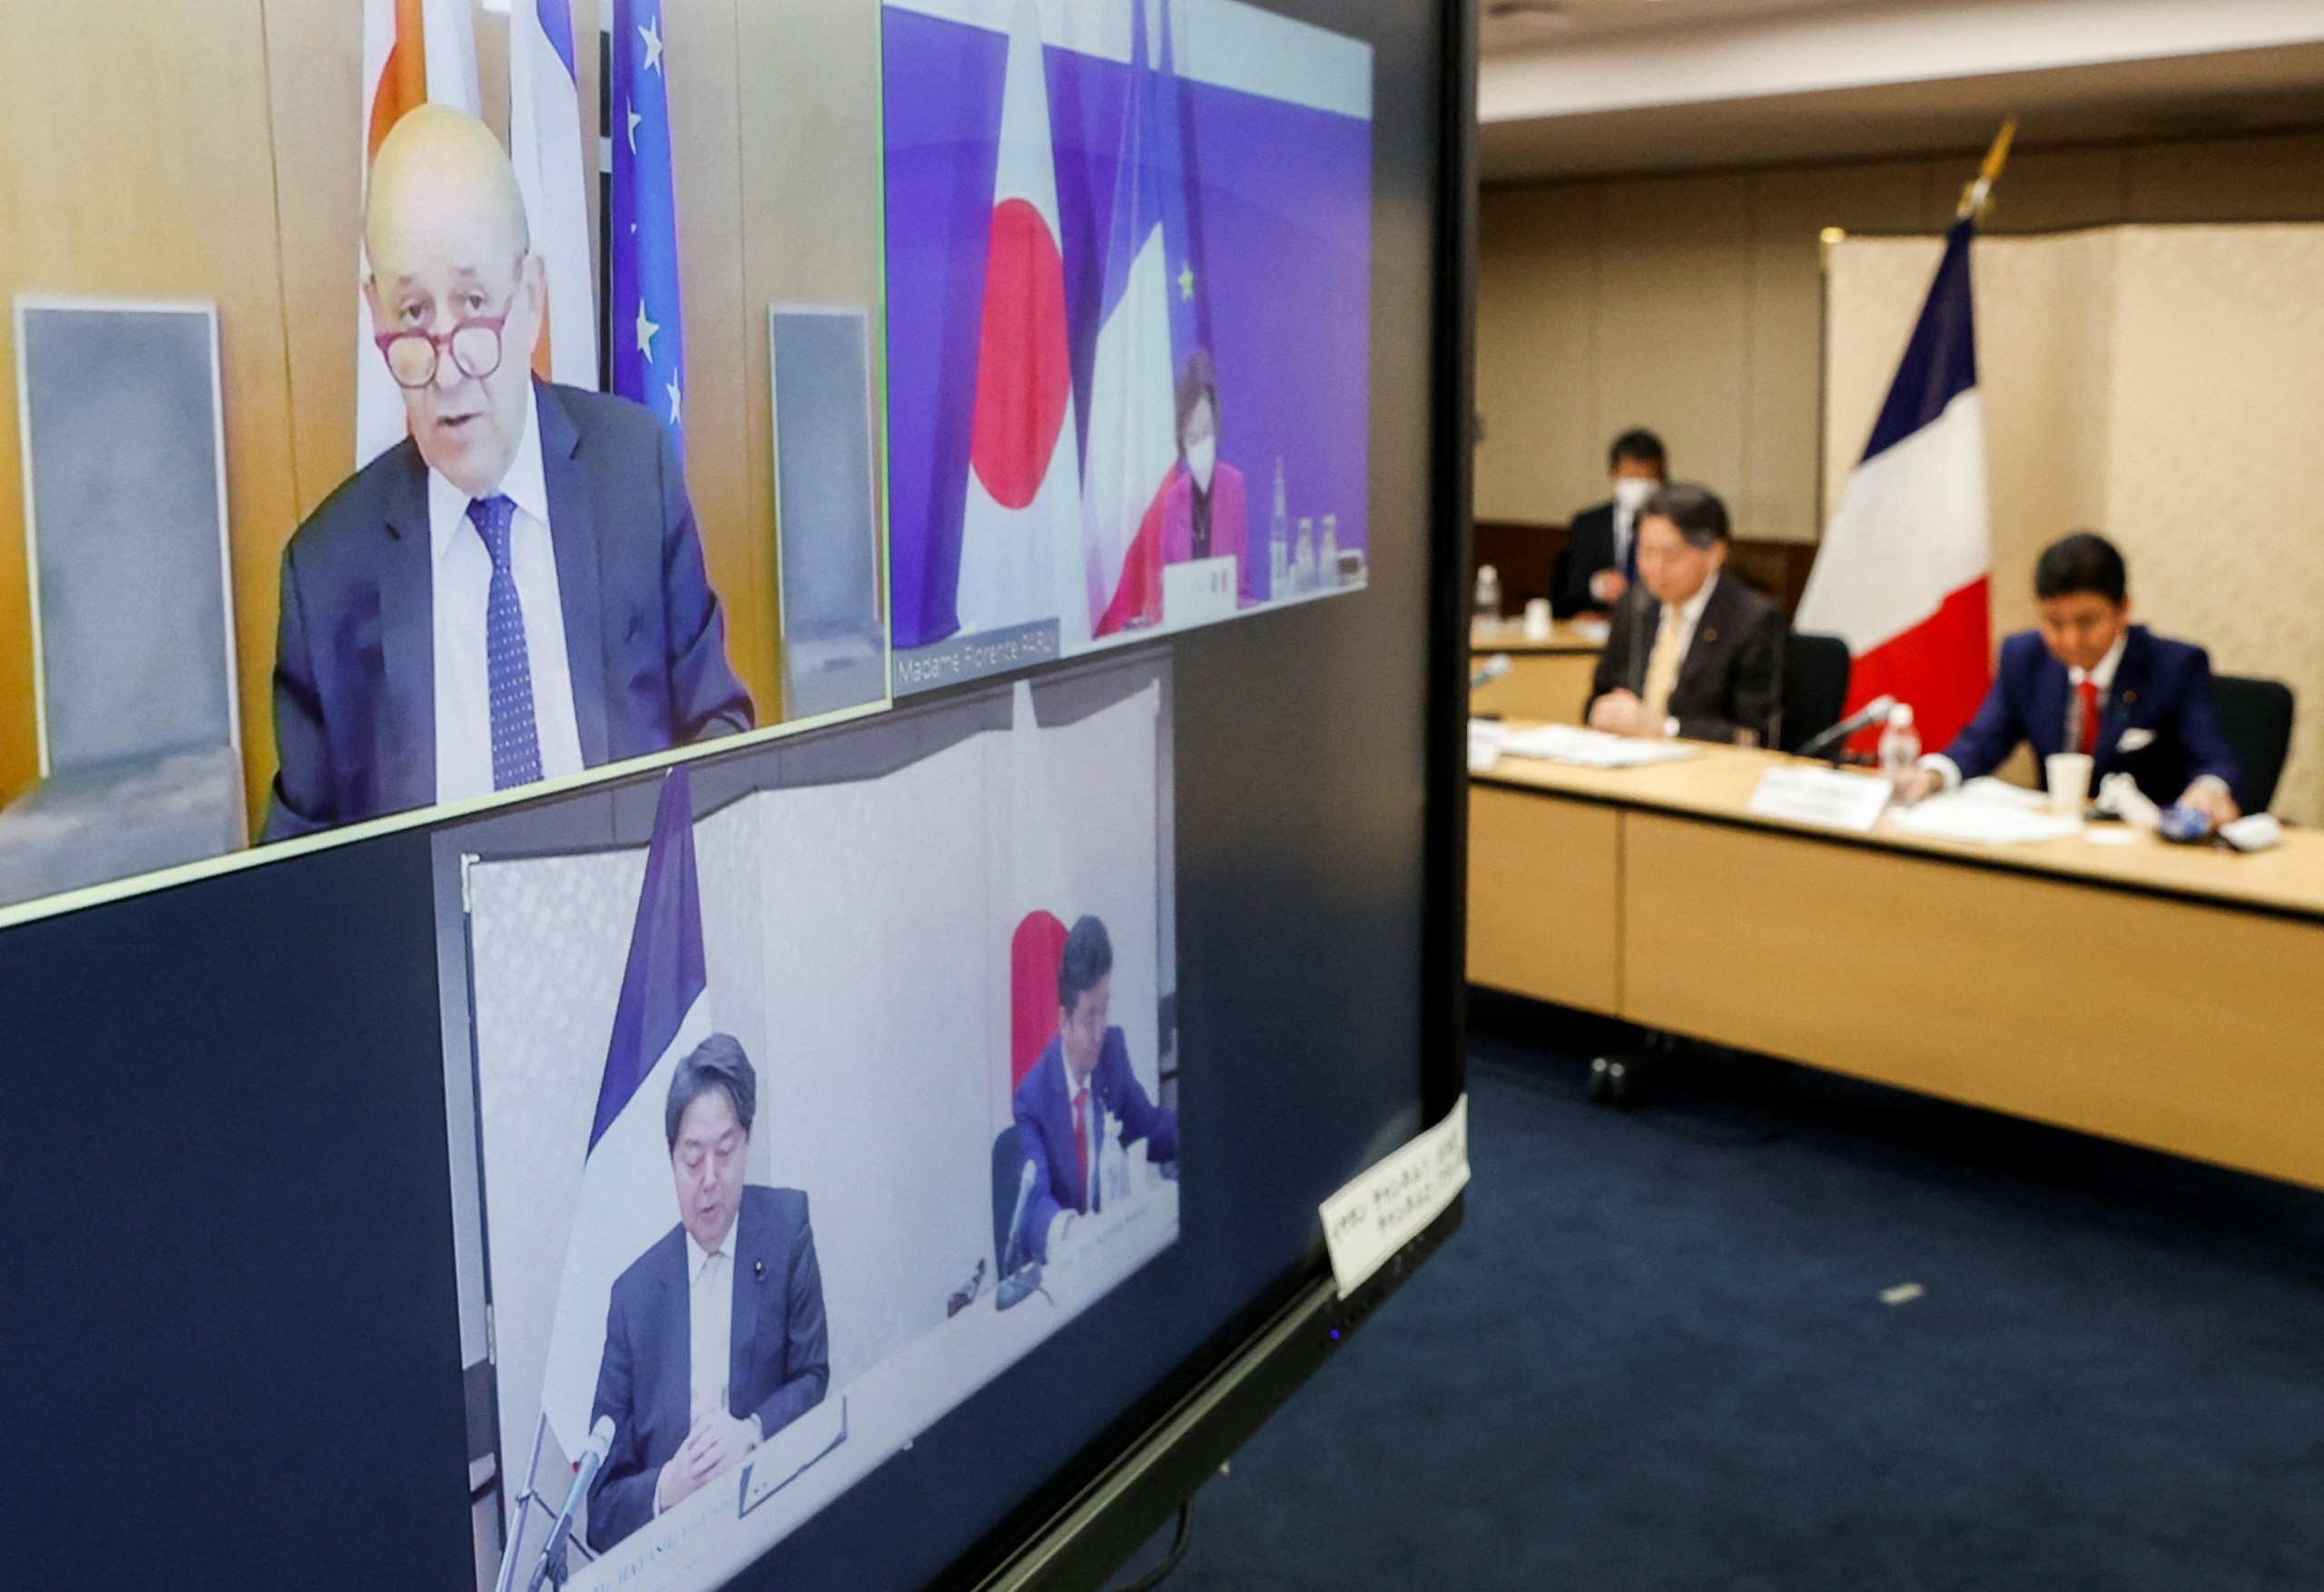 Japan's Foreign Minister Yoshimasa Hayashi and Defence Minister Nobuo Kishi and their French counterparts Jean-Yves Le Drian and Florence Parly attend a video conference at the Foreign Ministry in Tokyo, Japan January 20, 2022. REUTERS/Issei Kato/Pool Photo: ISSEI KATO/REUTERS